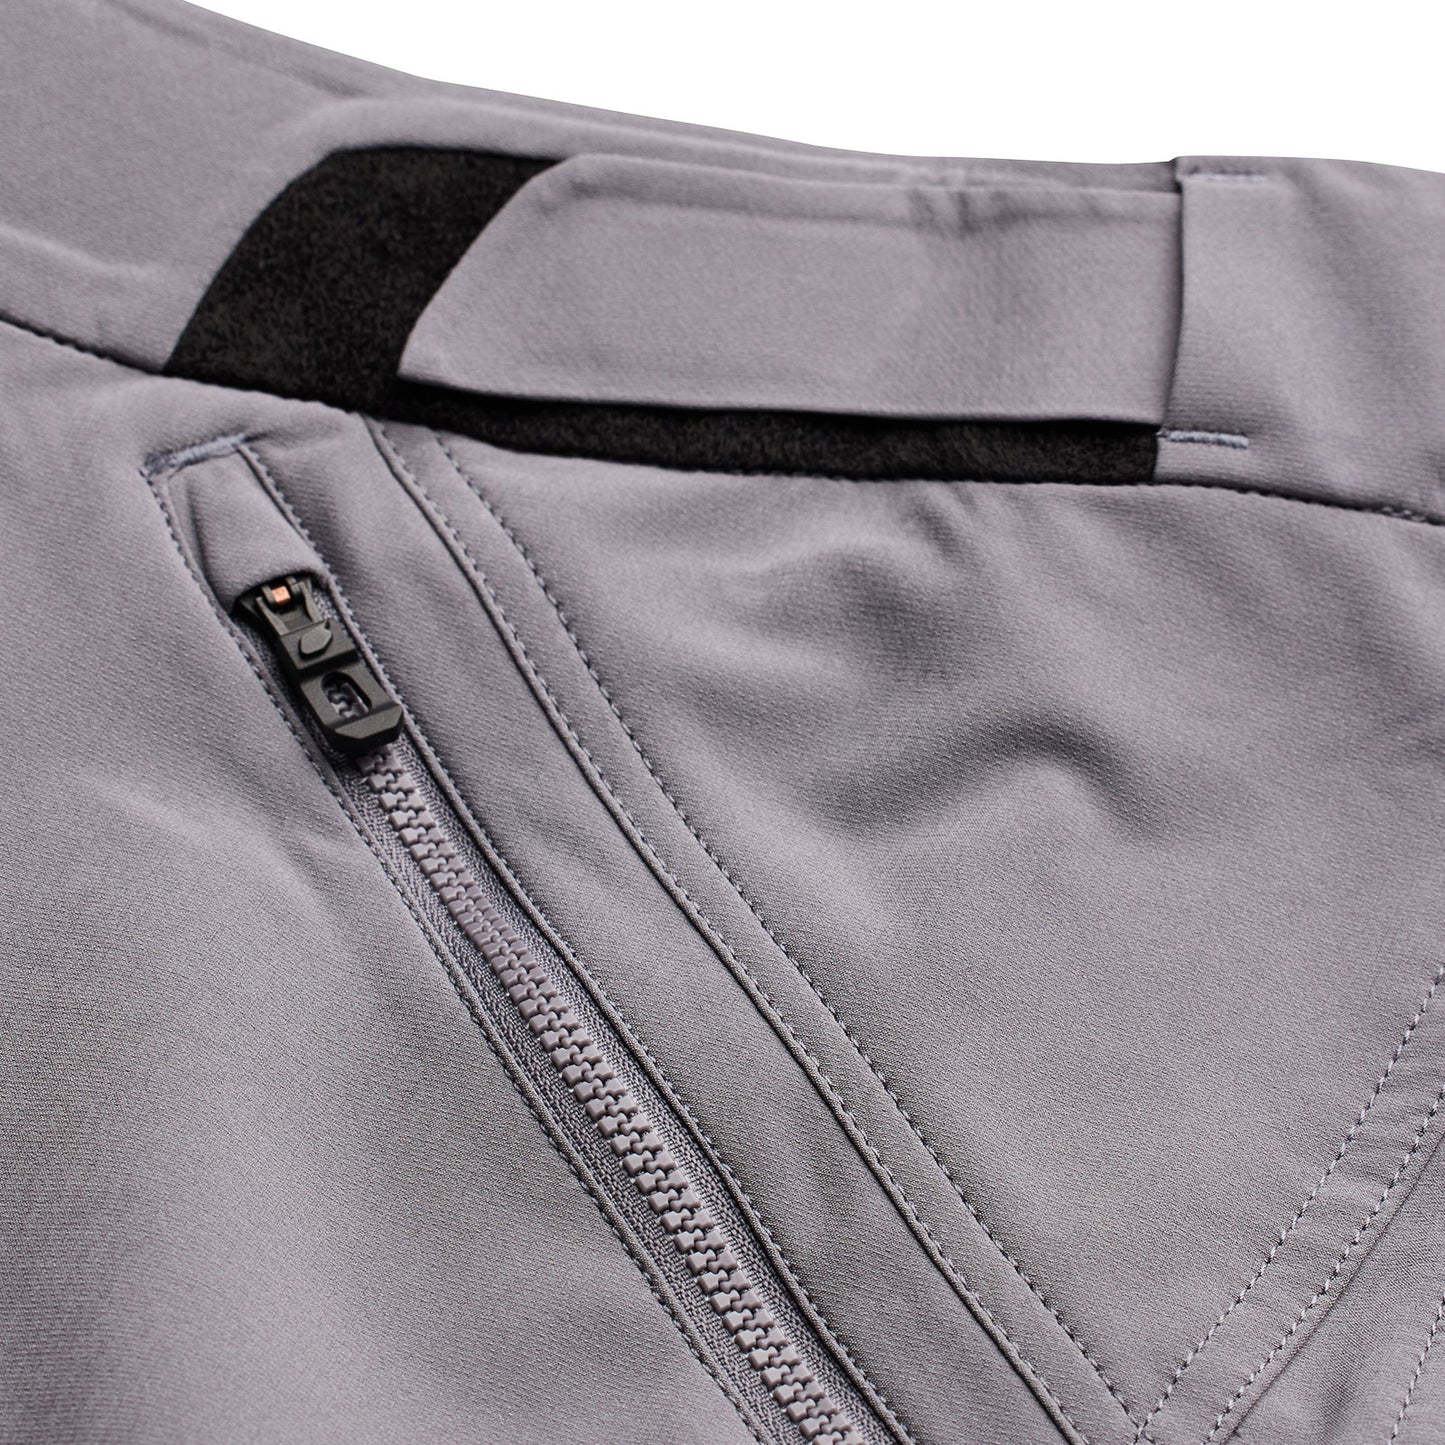 Skyline Air Short W/Liner Mono Charcoal